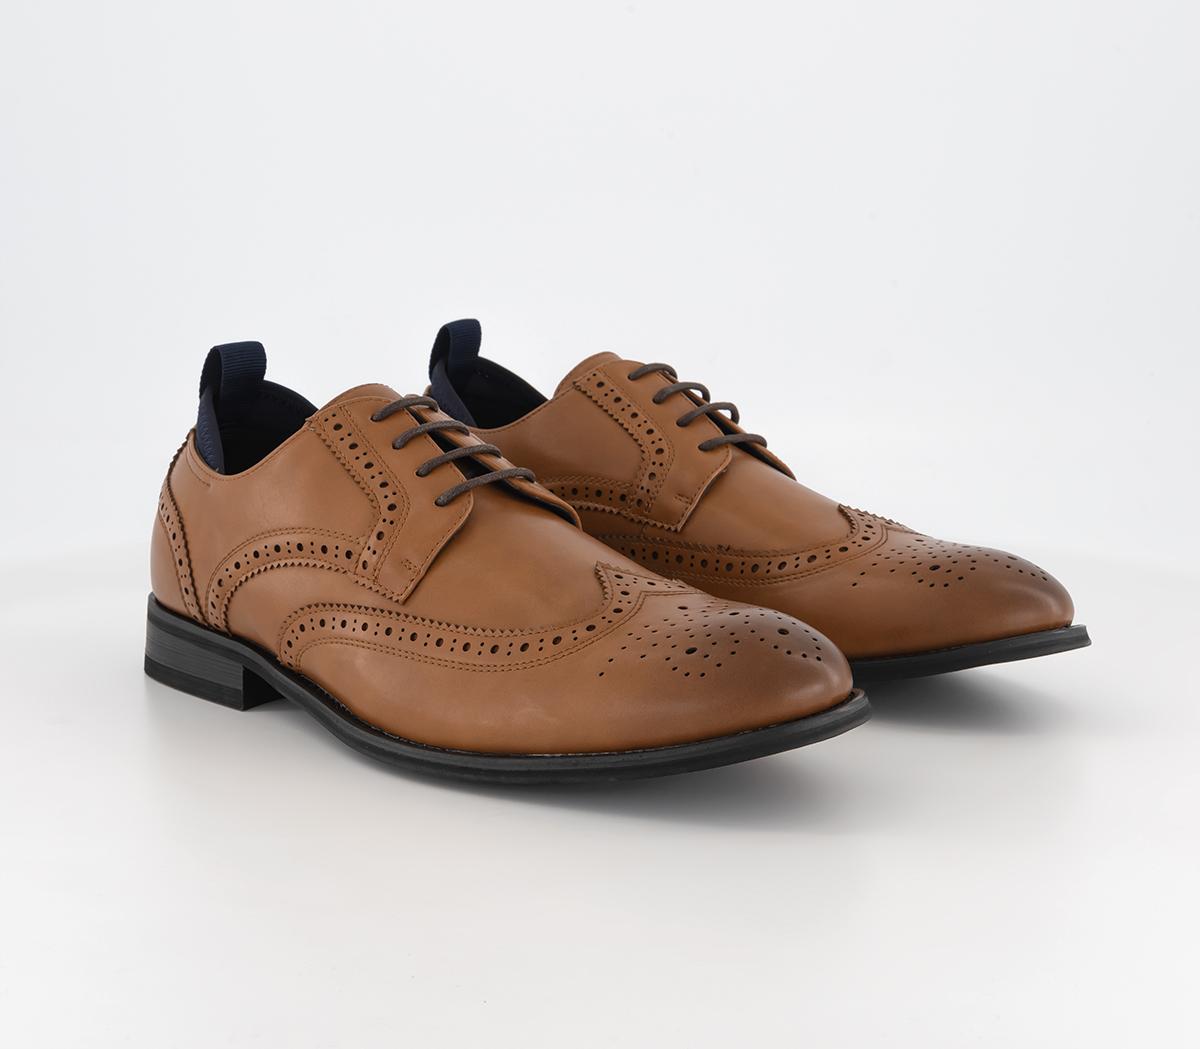 OFFICE Mens Montgomery Brogue Derby Shoes Tan, 6